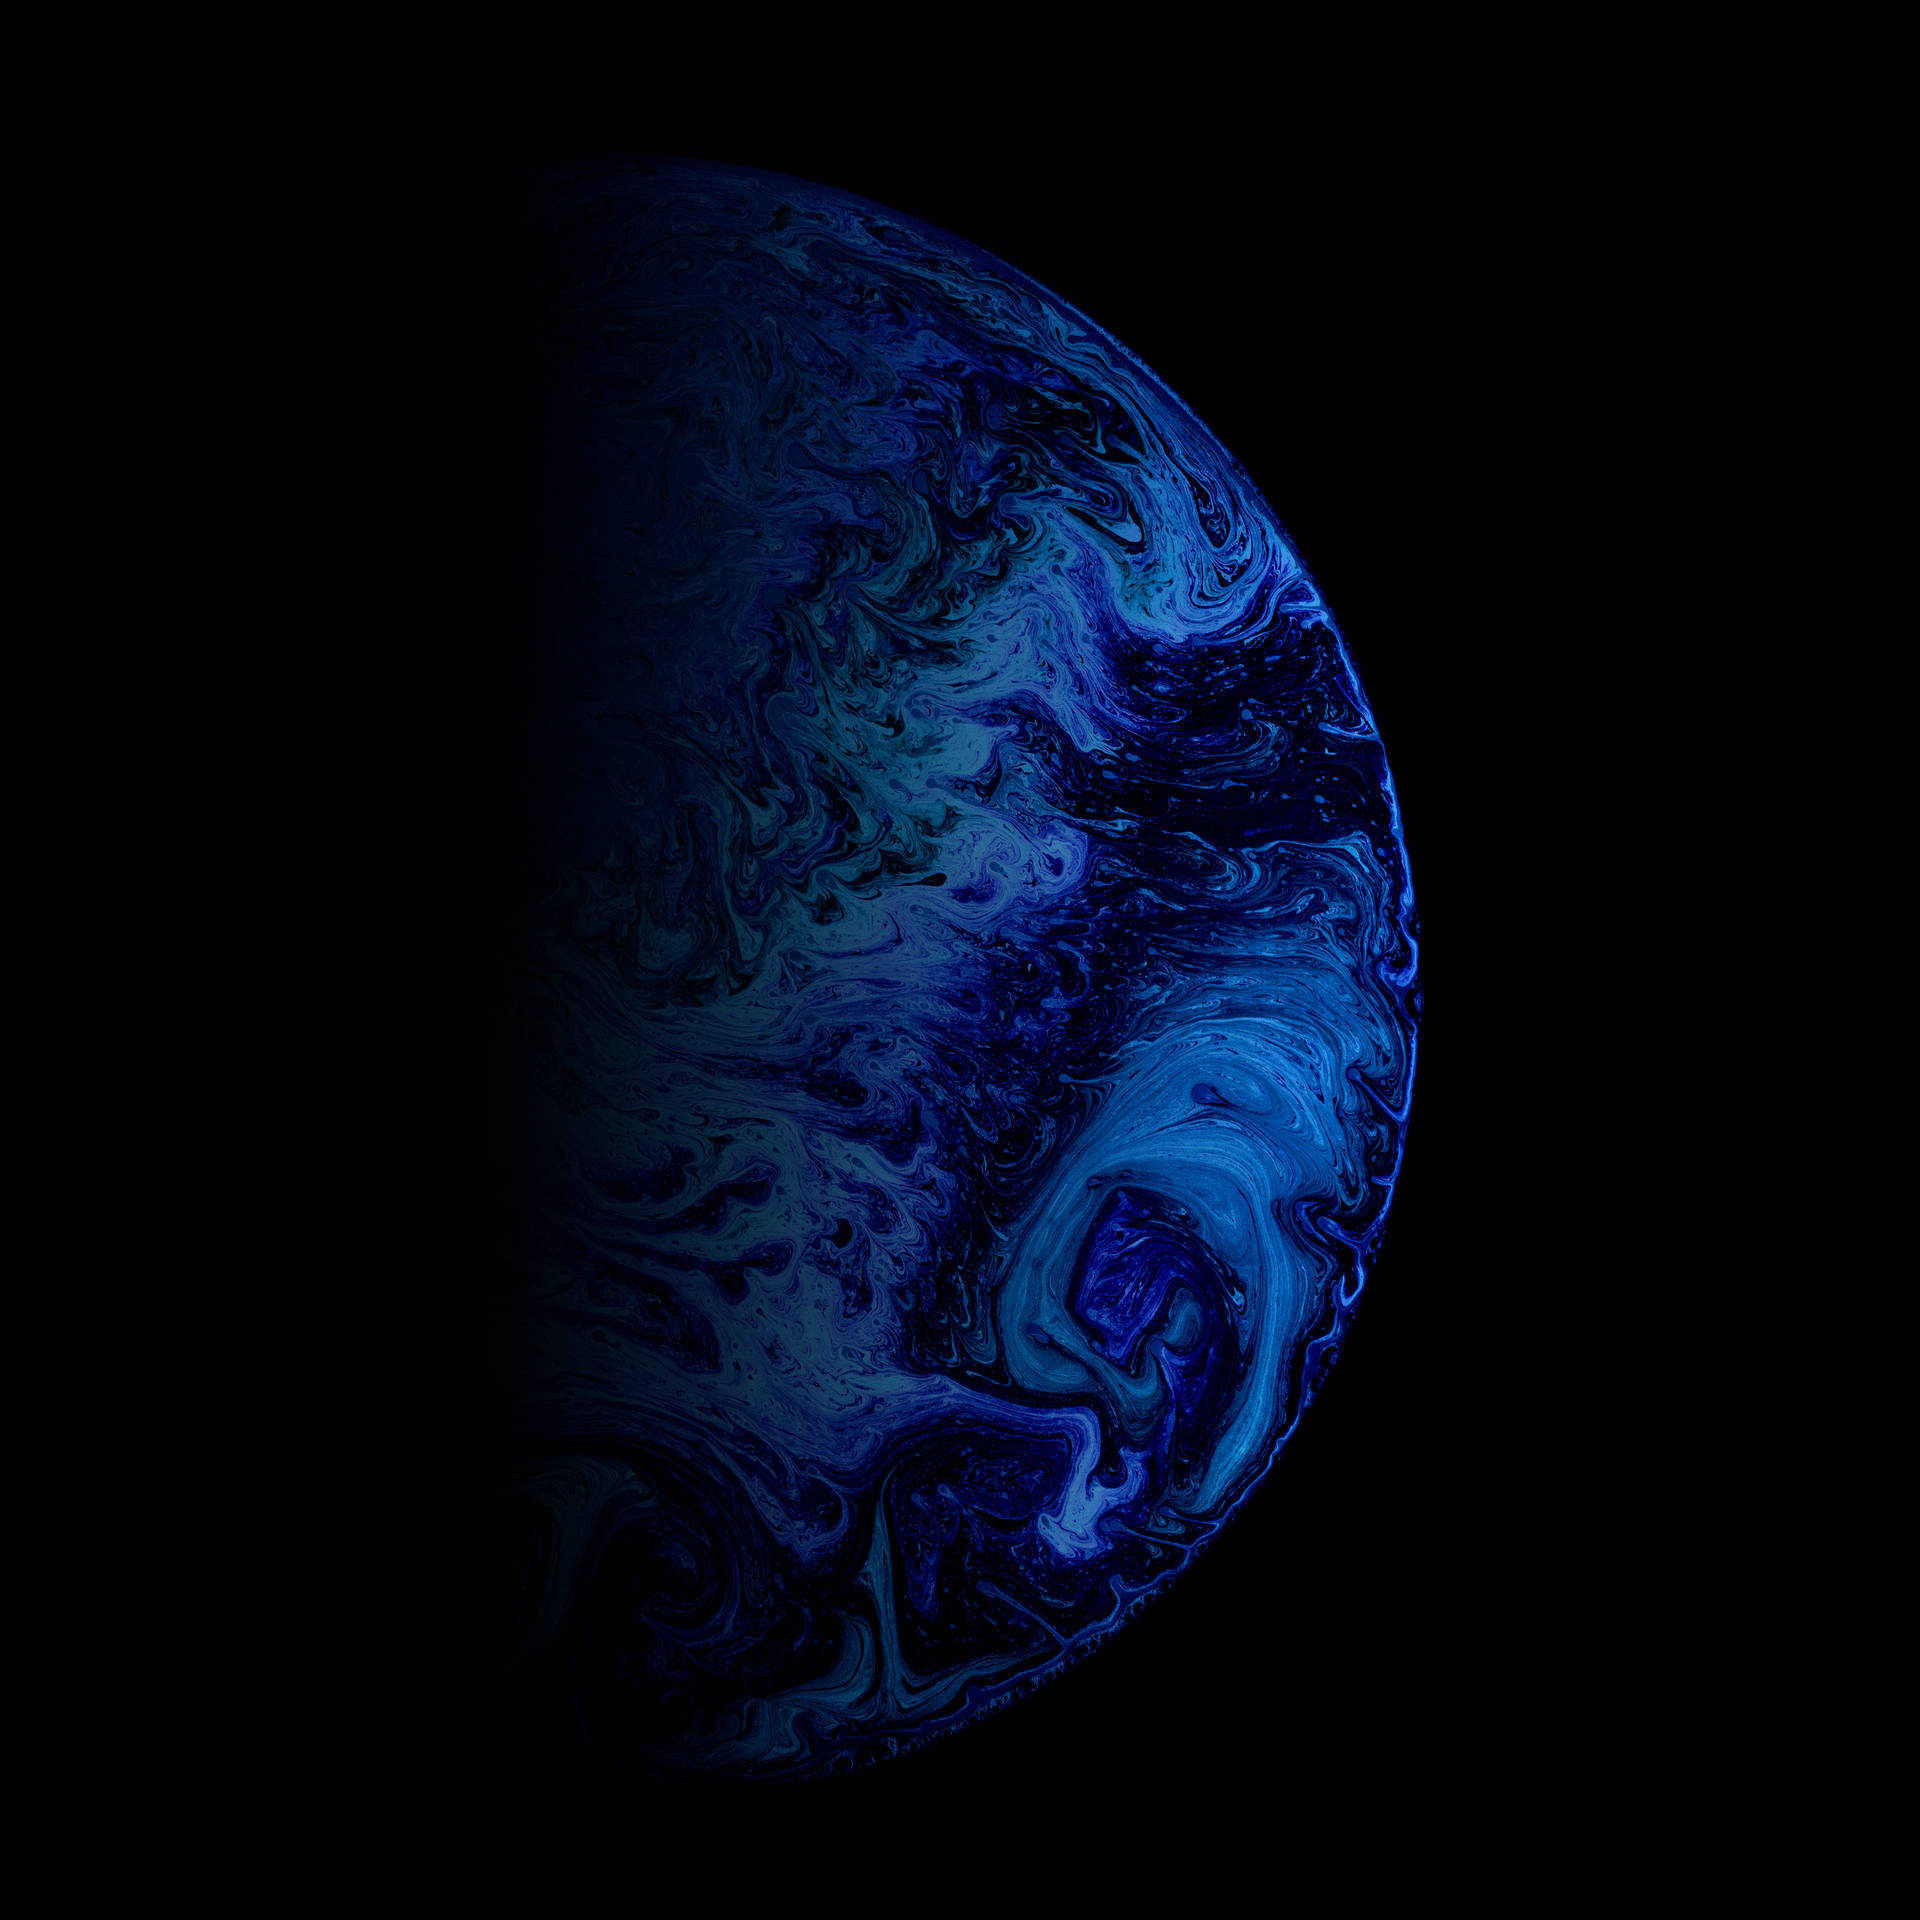 8008X8008 Oled Wallpaper and Background